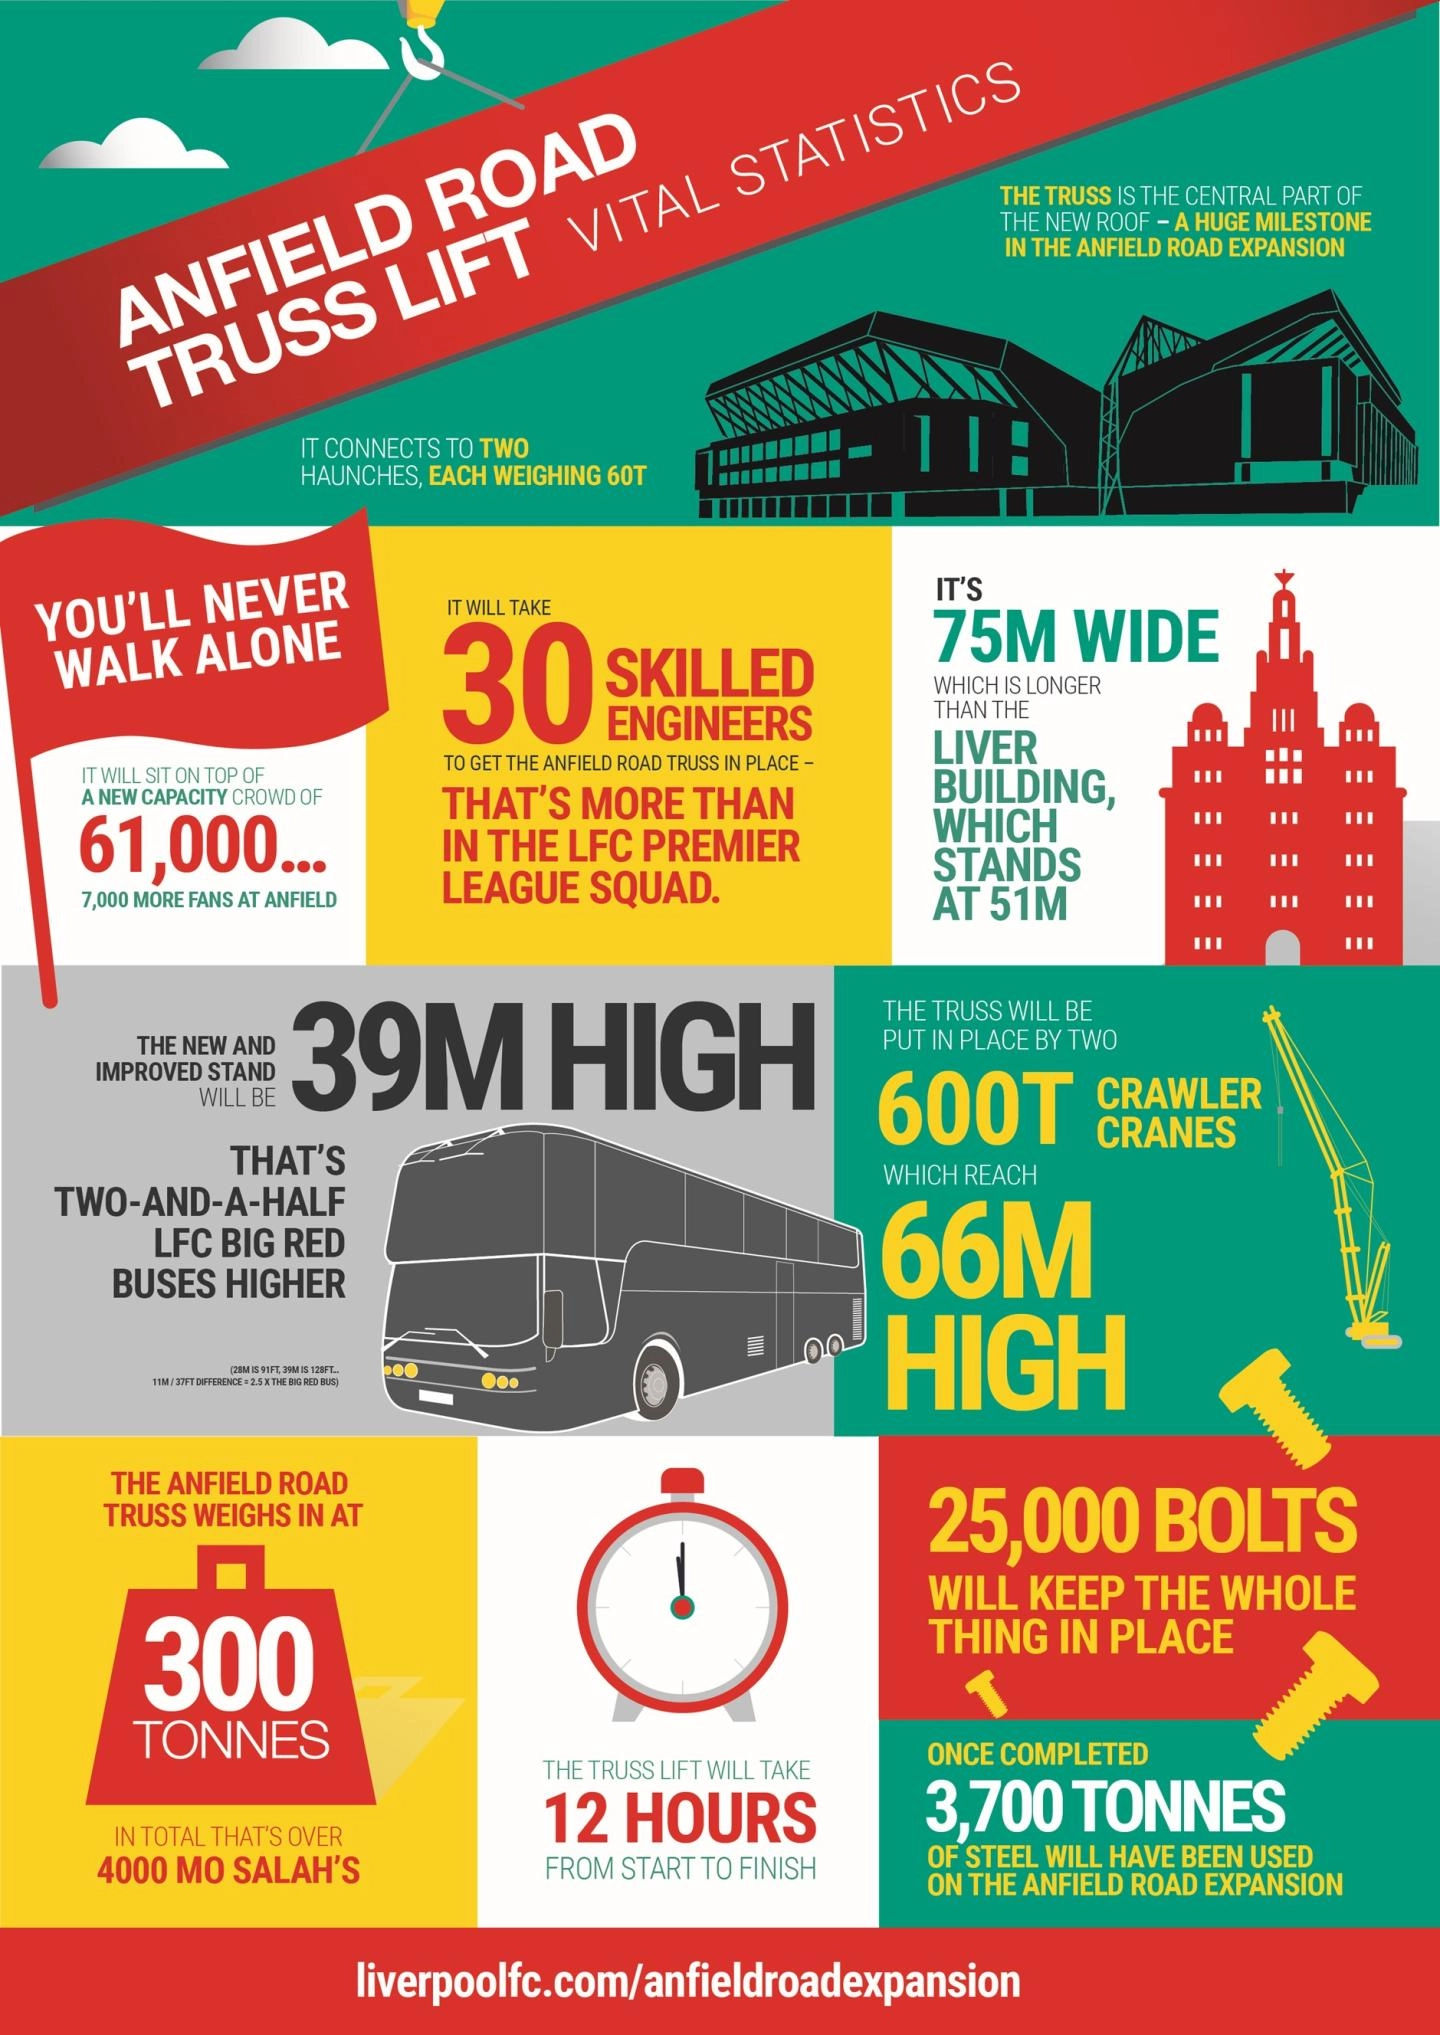 In numbers: Anfield Road truss lift